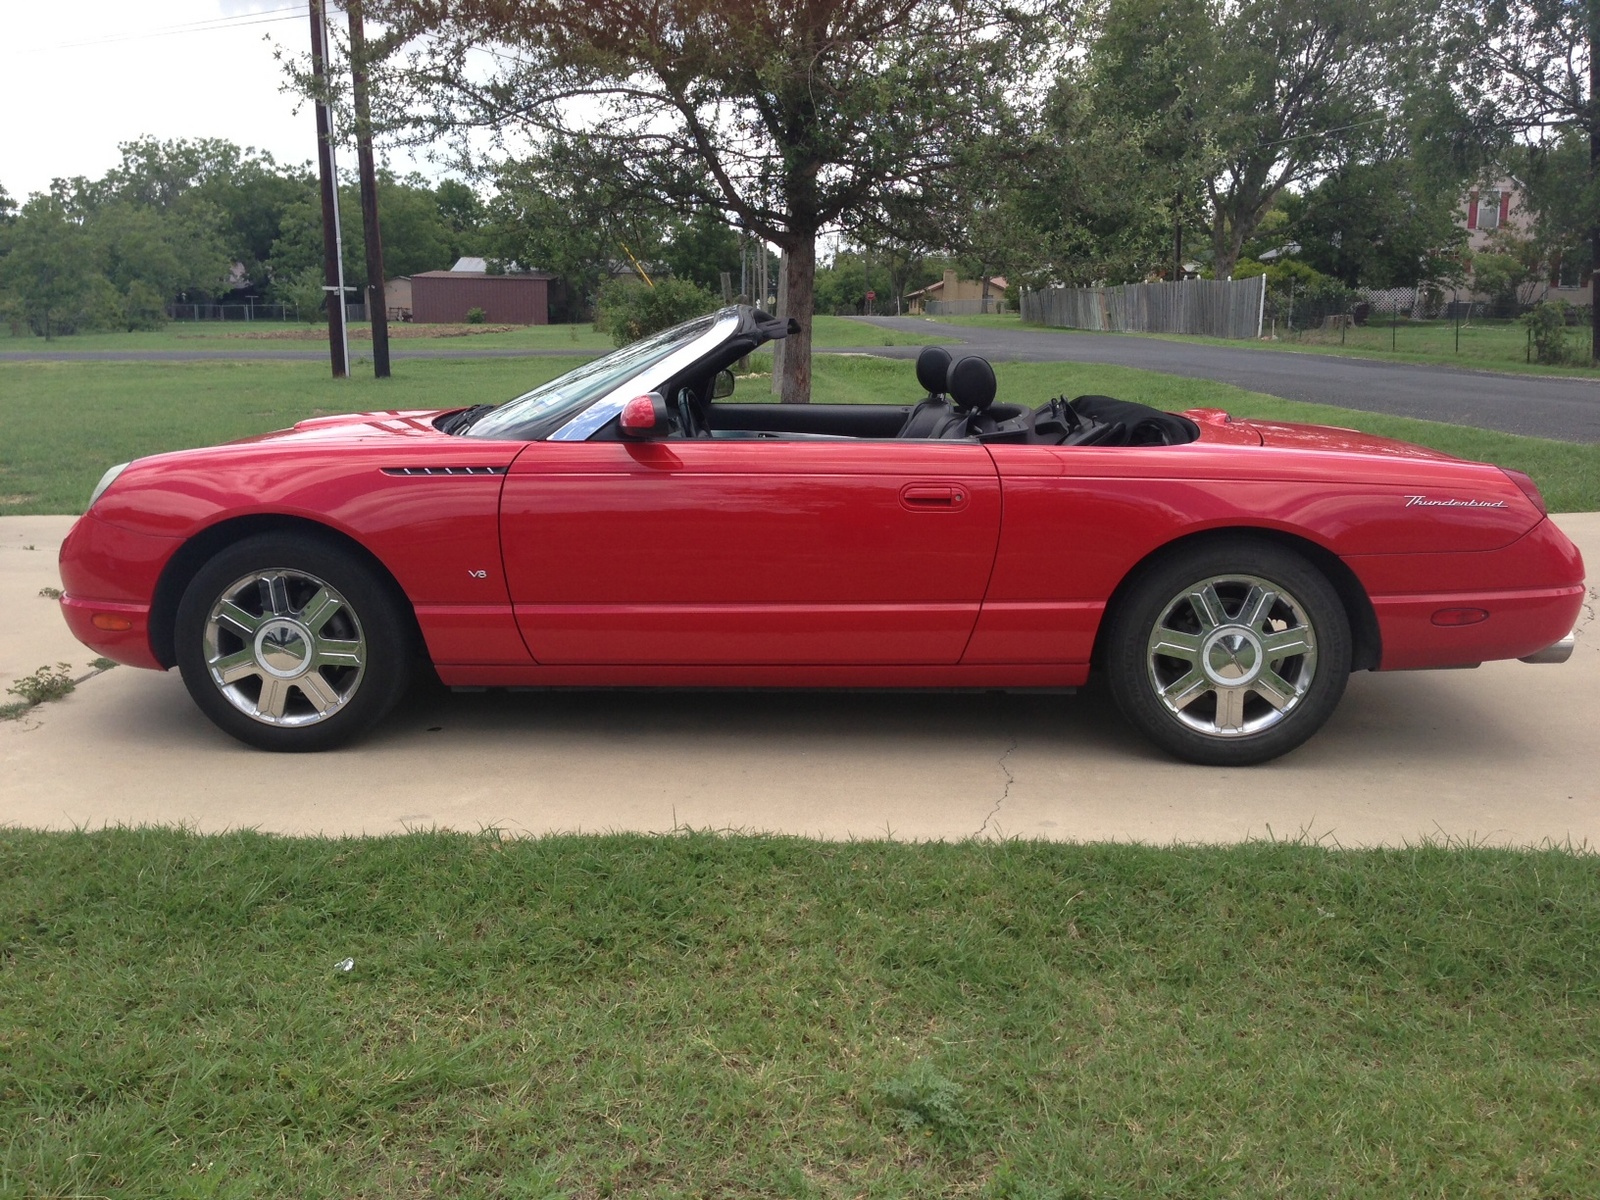 2004 Ford thunderbird convertible review #6